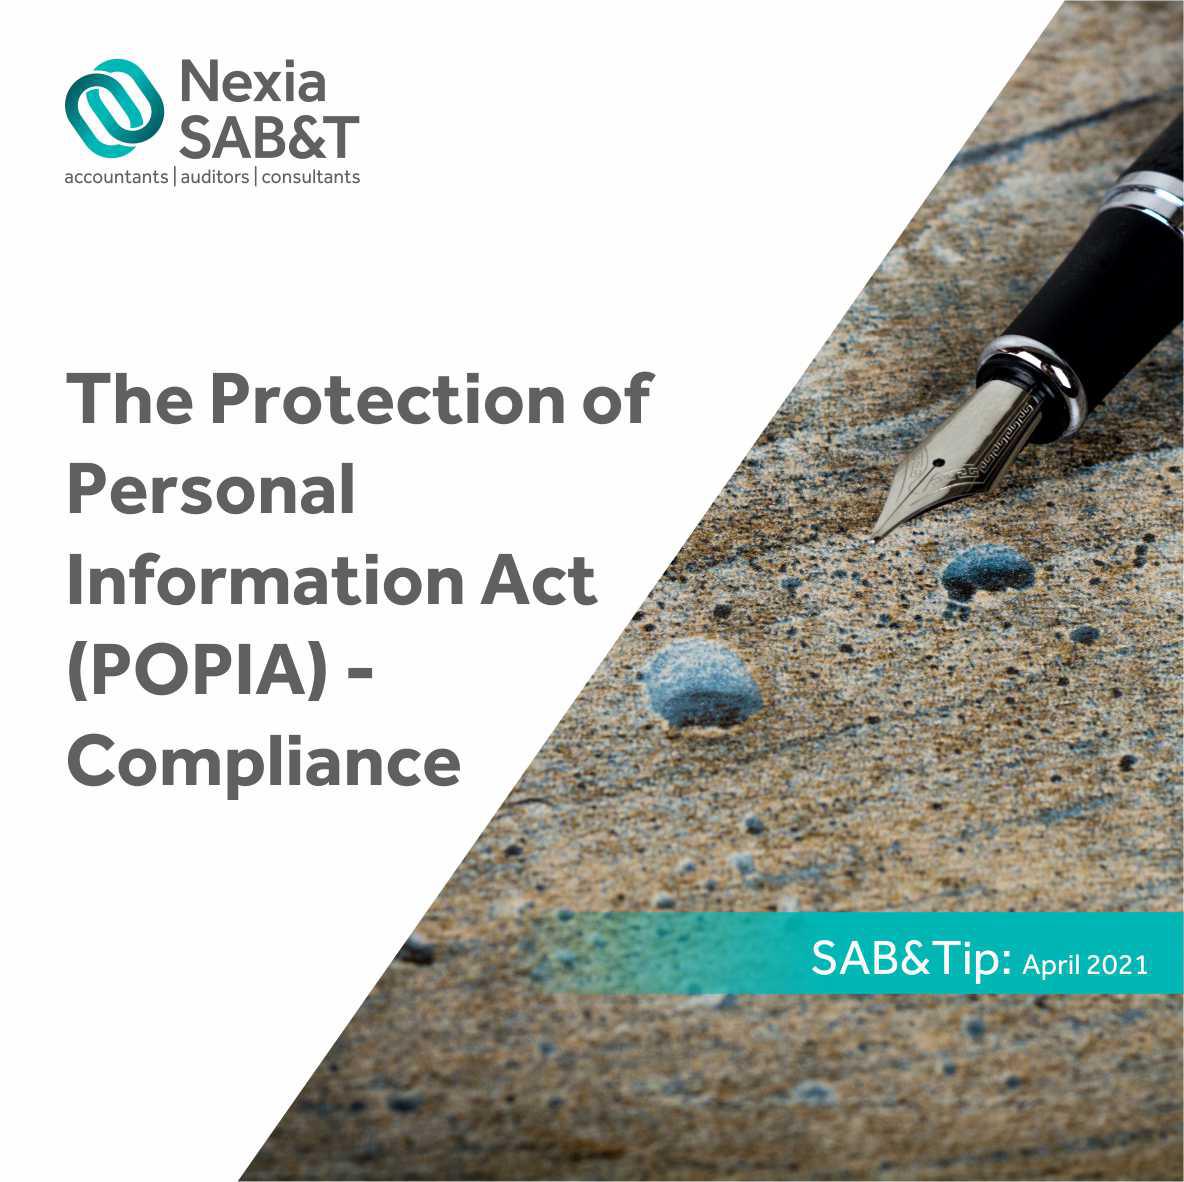  The Protection of Personal Information Act (Popia) – Compliance